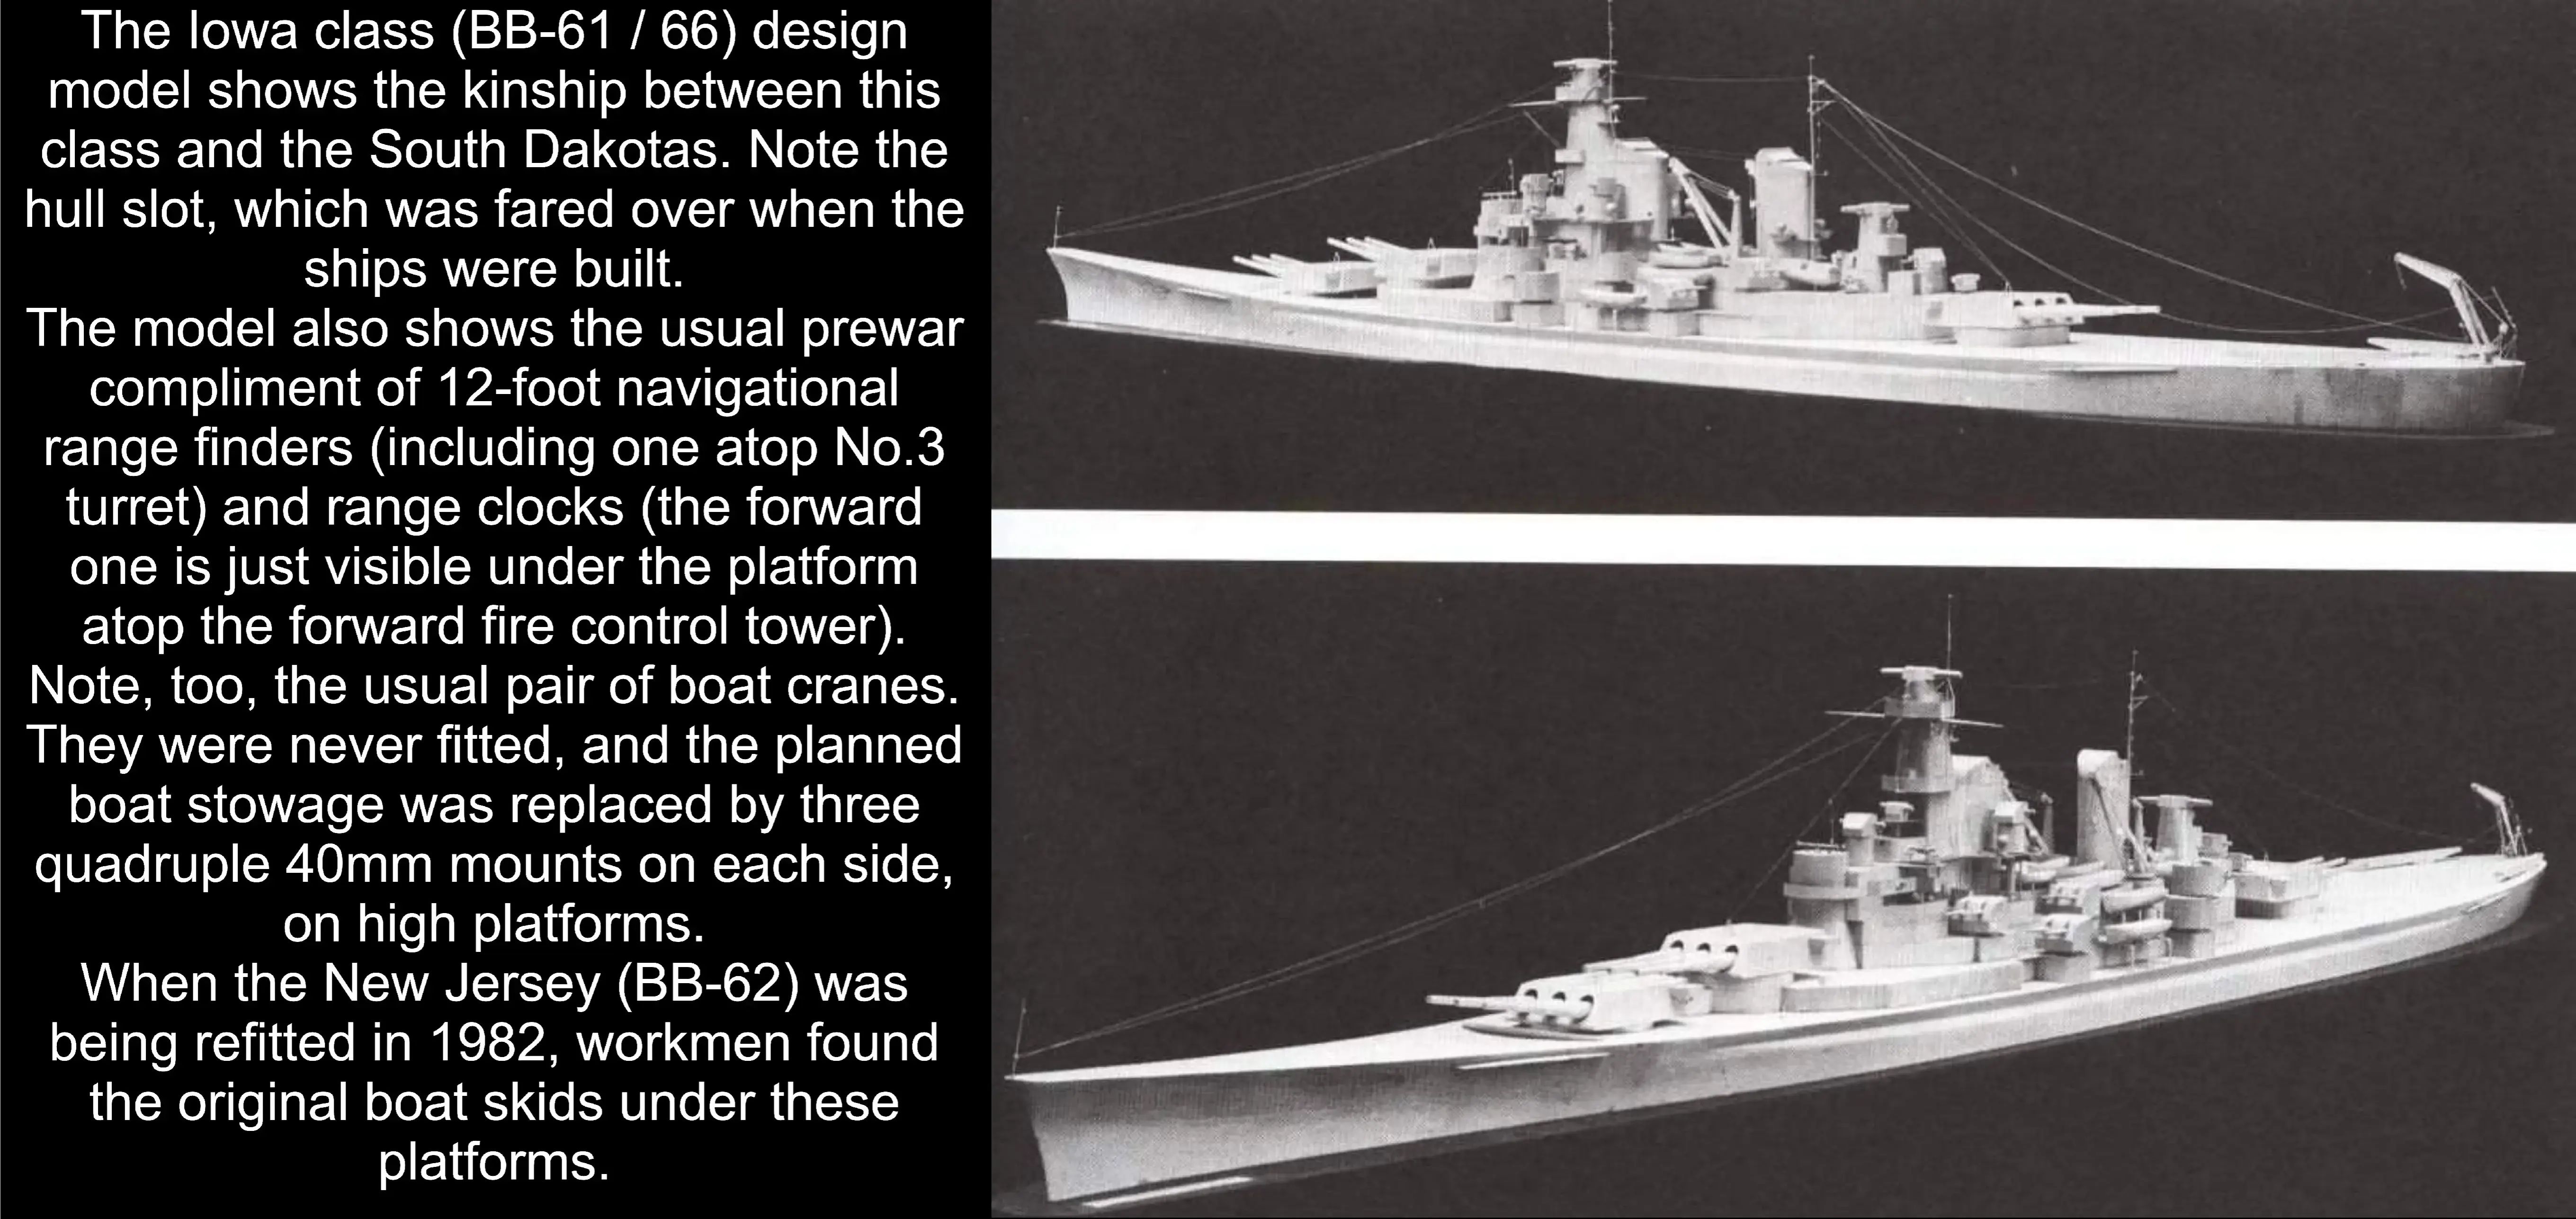 The Iowa class (BB-61 / 66) design model shows the kinship between this class and the South Dakotas. Note the hull slot, which was fared over when the ships were built.